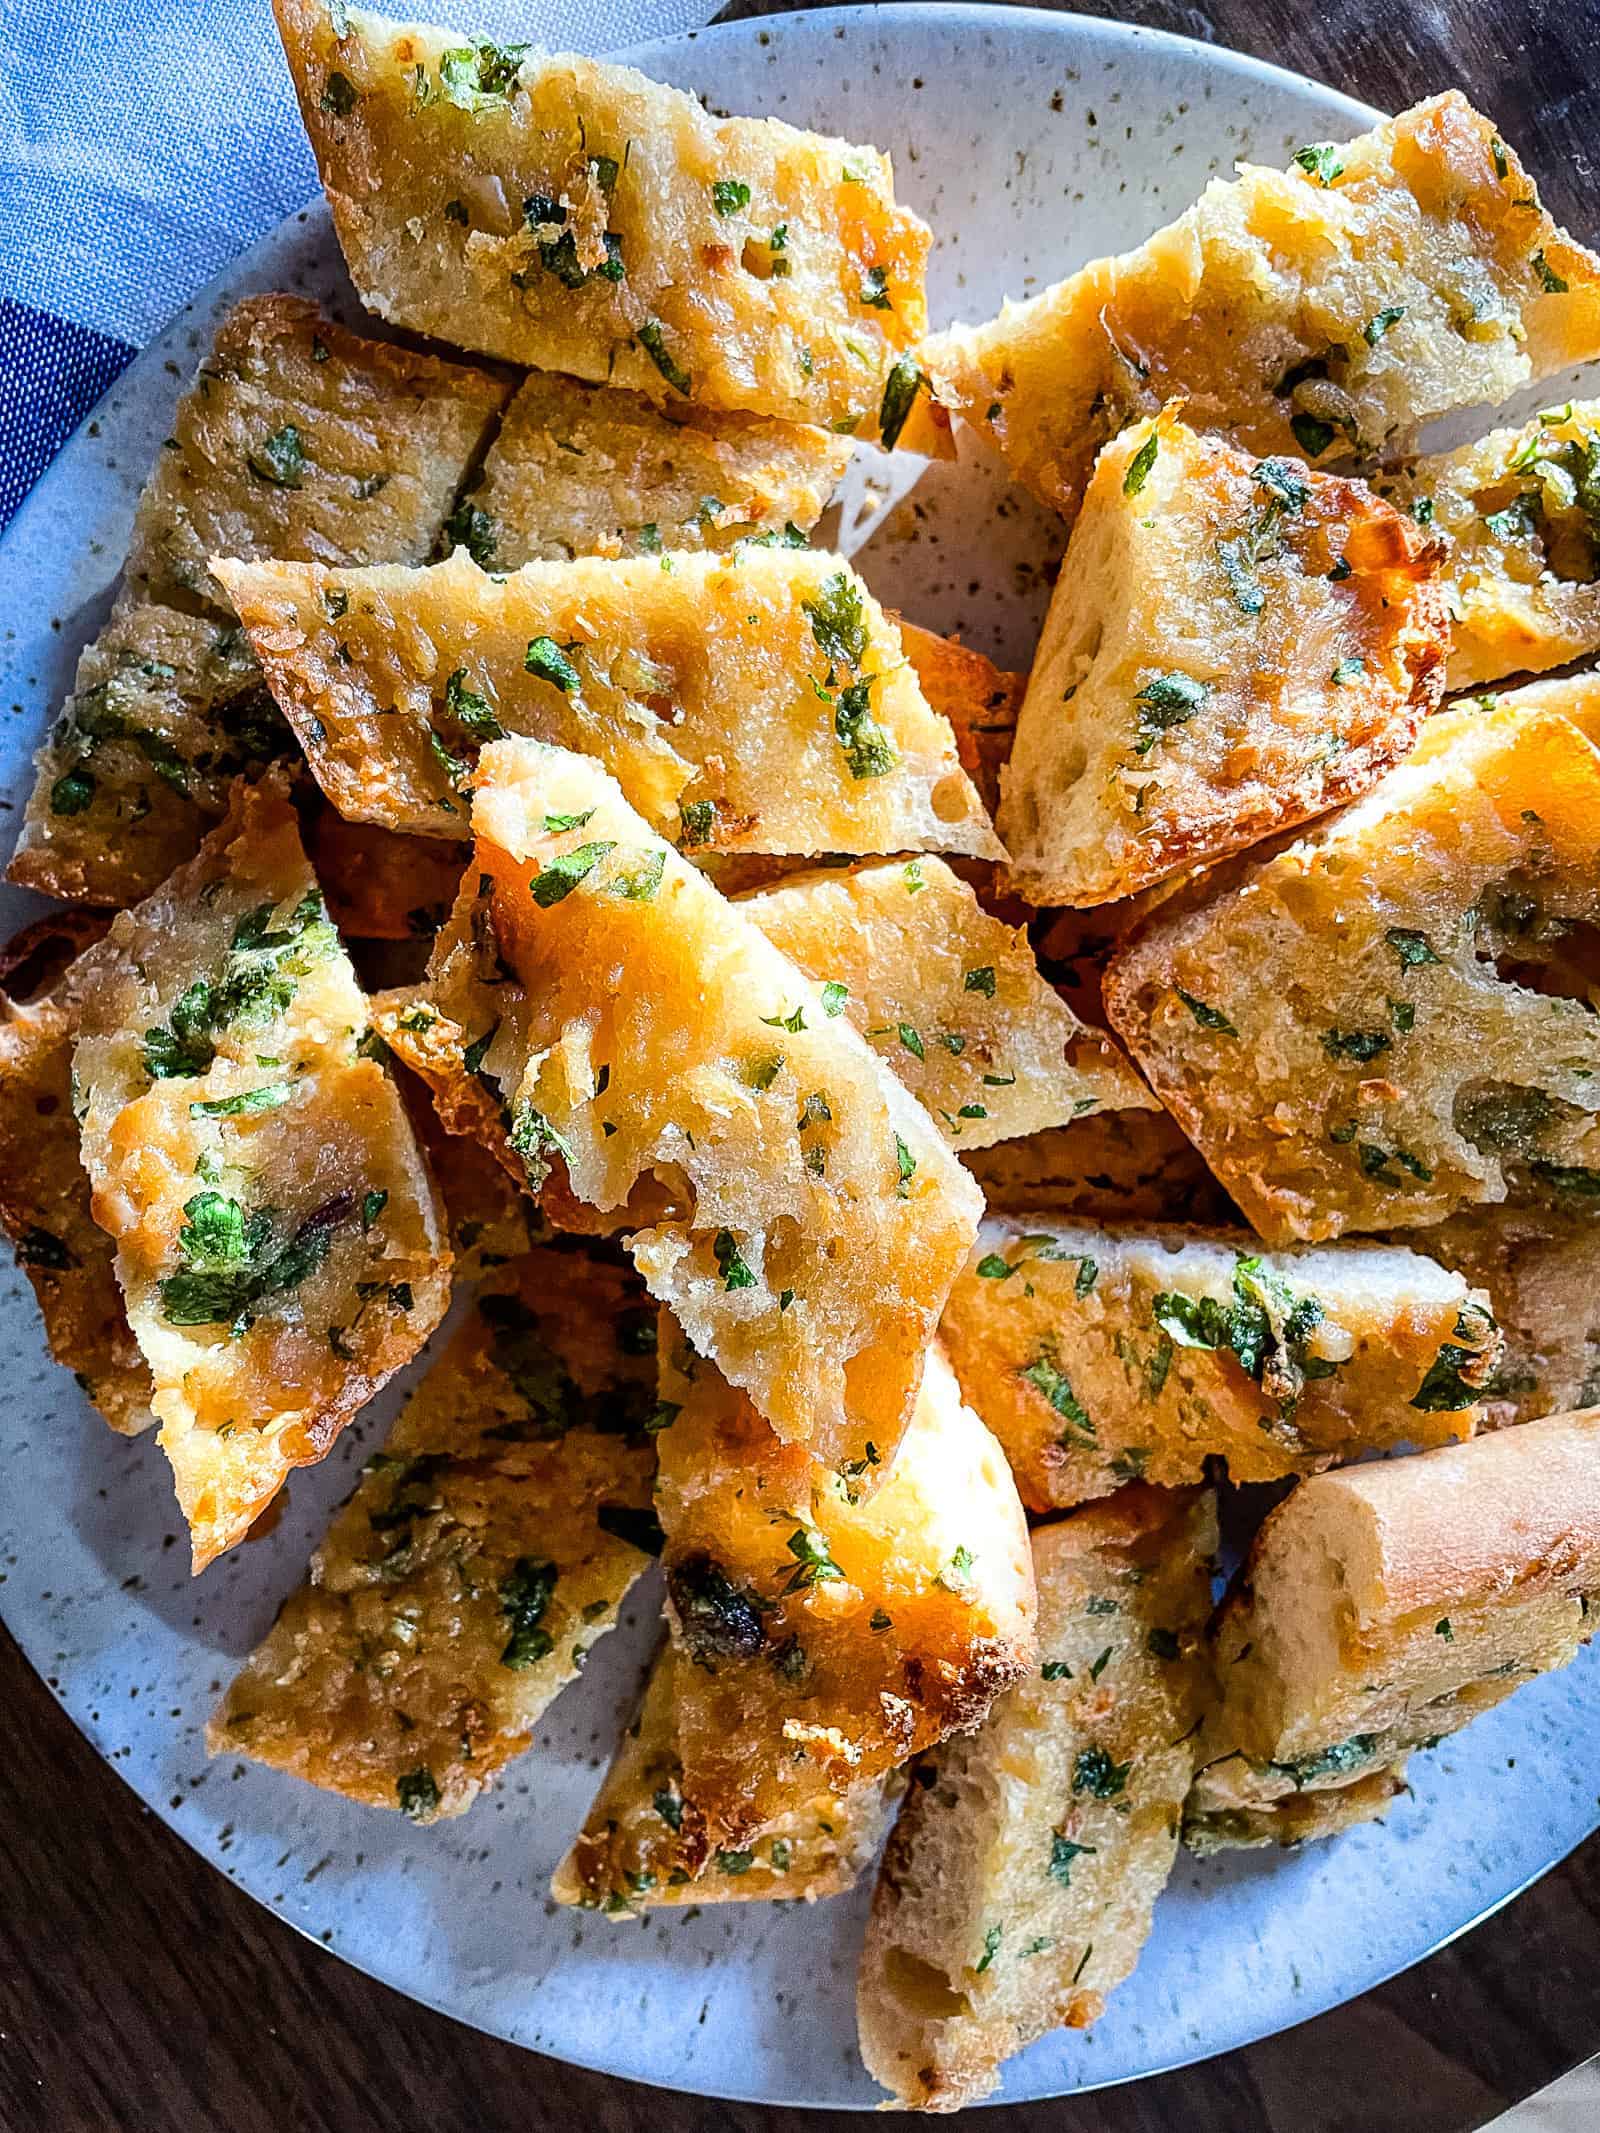 Roasted garlic bread slices on a plate